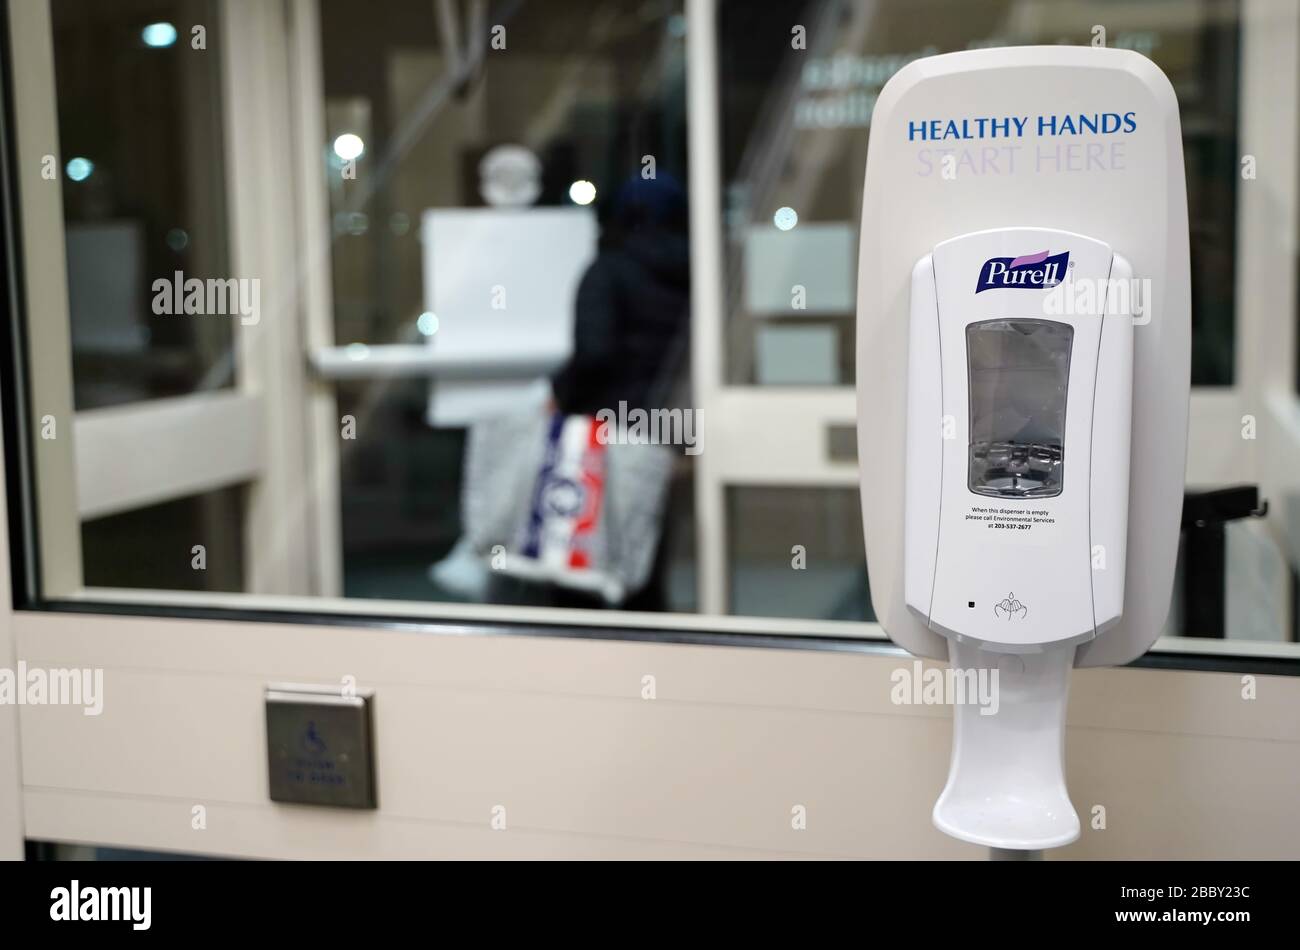 Meriden, CT / USA -  March 16, 2020: A recently used sanitizer dispenser is in the foreground as a healthcare worker in the background exits the hospi Stock Photo